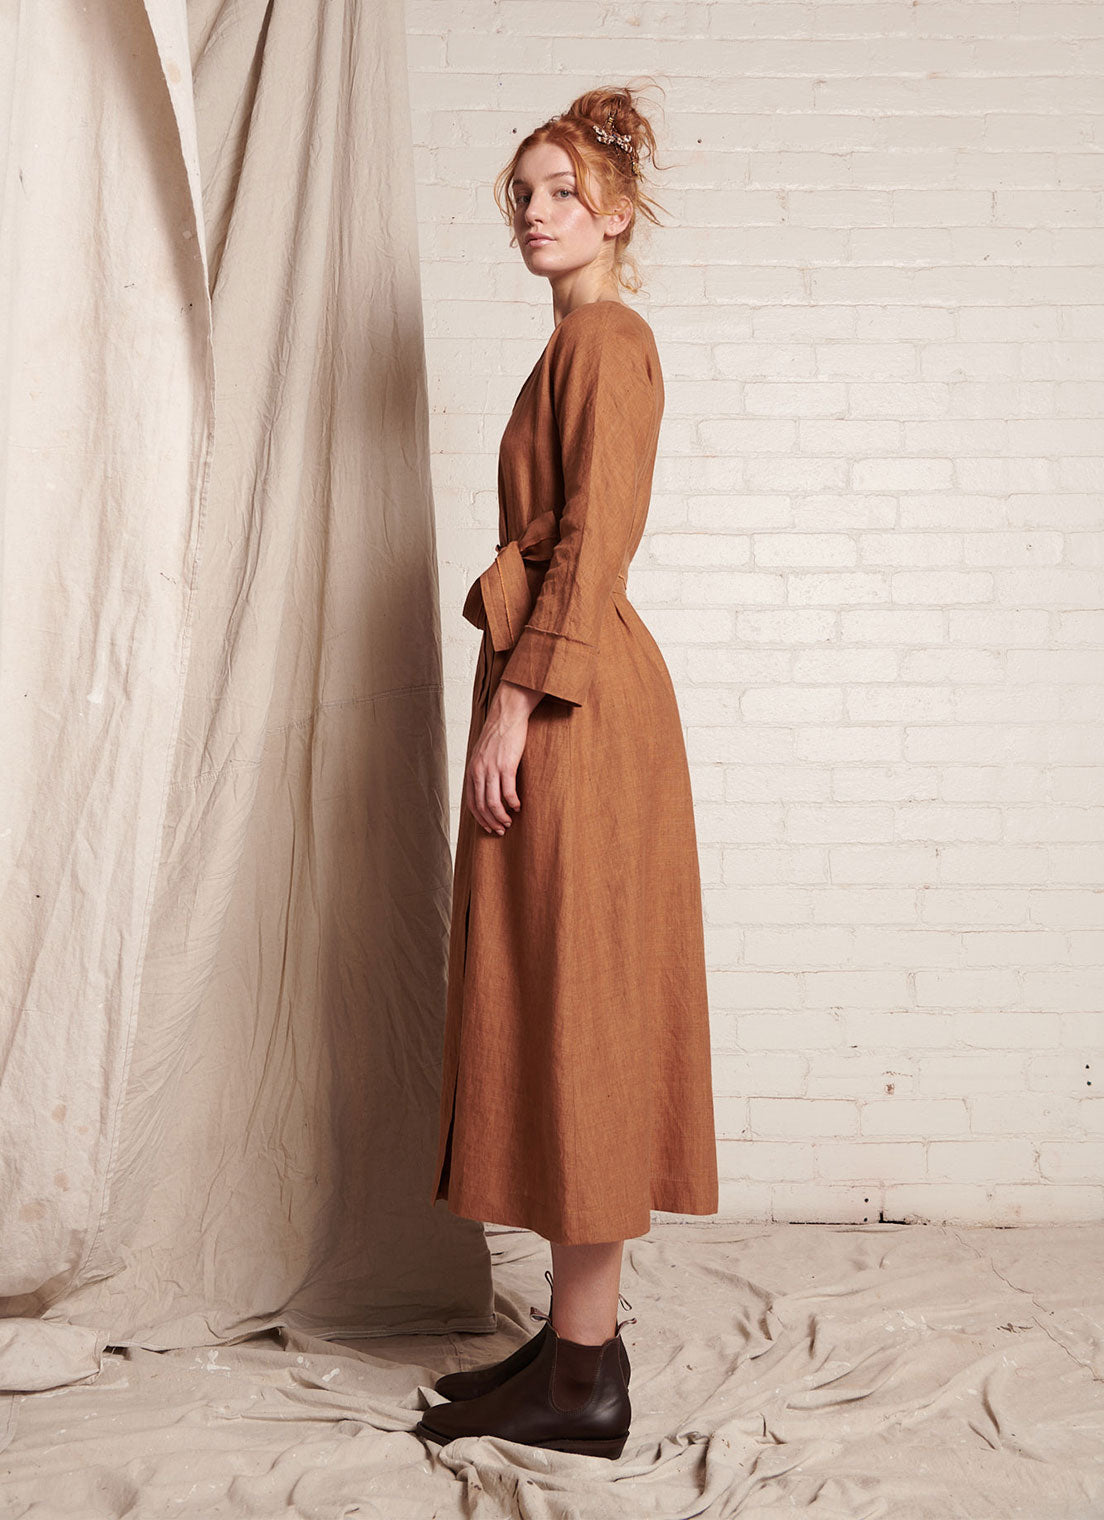 A bronze, wrap, midi-length dress with open, square-cut neckline and long, cuffed sleeves with hand frayed edge finish made from European linen